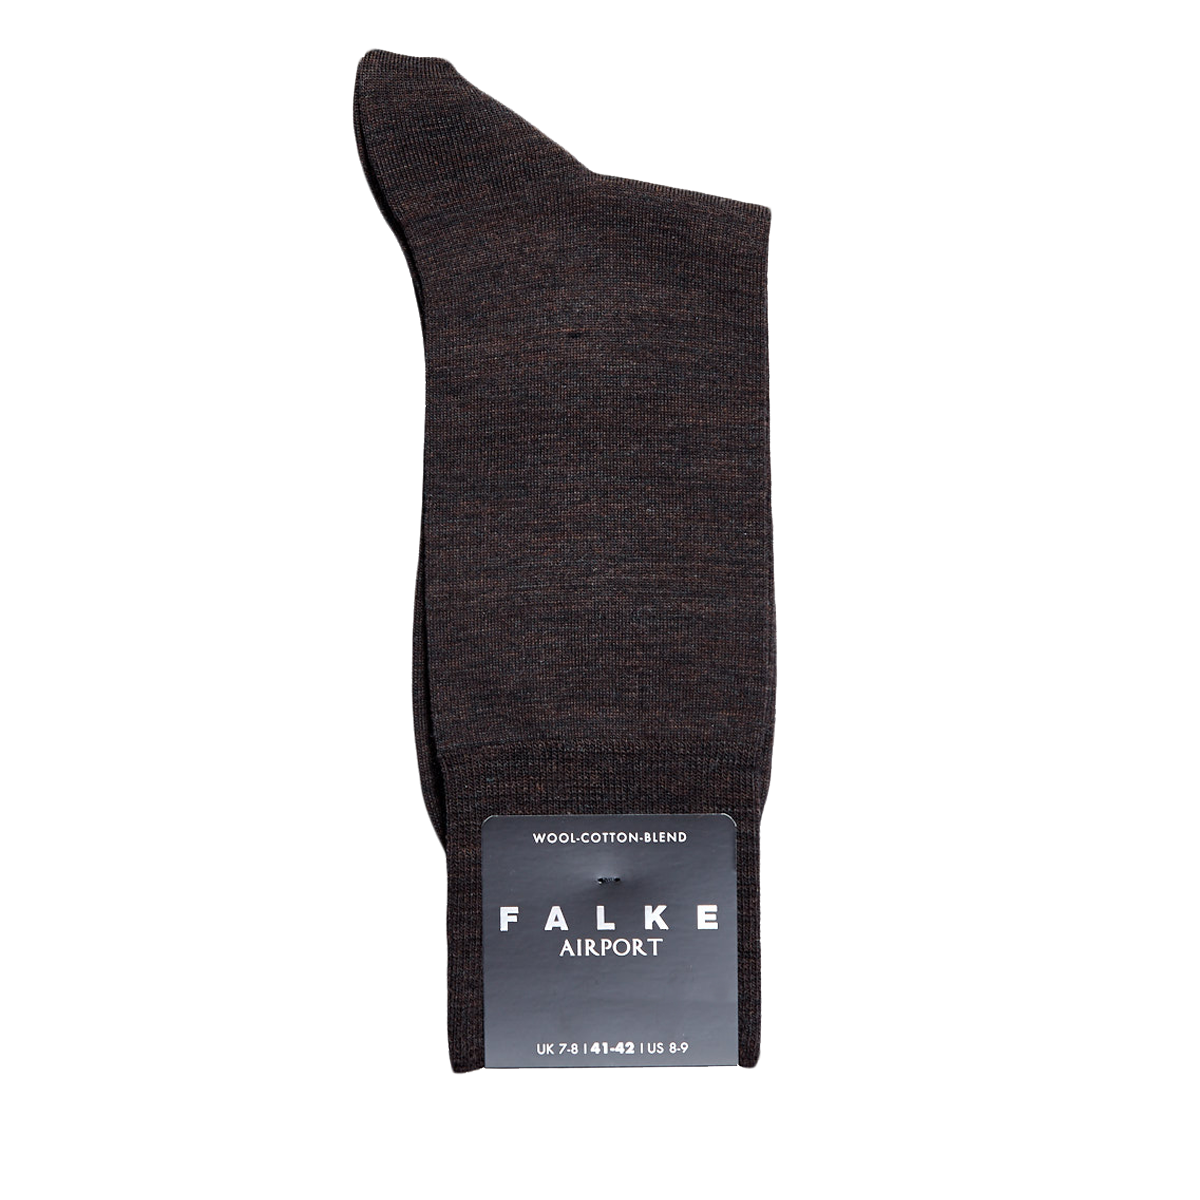 A pair of temperature-regulating, Brown Melange Airport Wool Cotton socks with the word "Falke" on them.